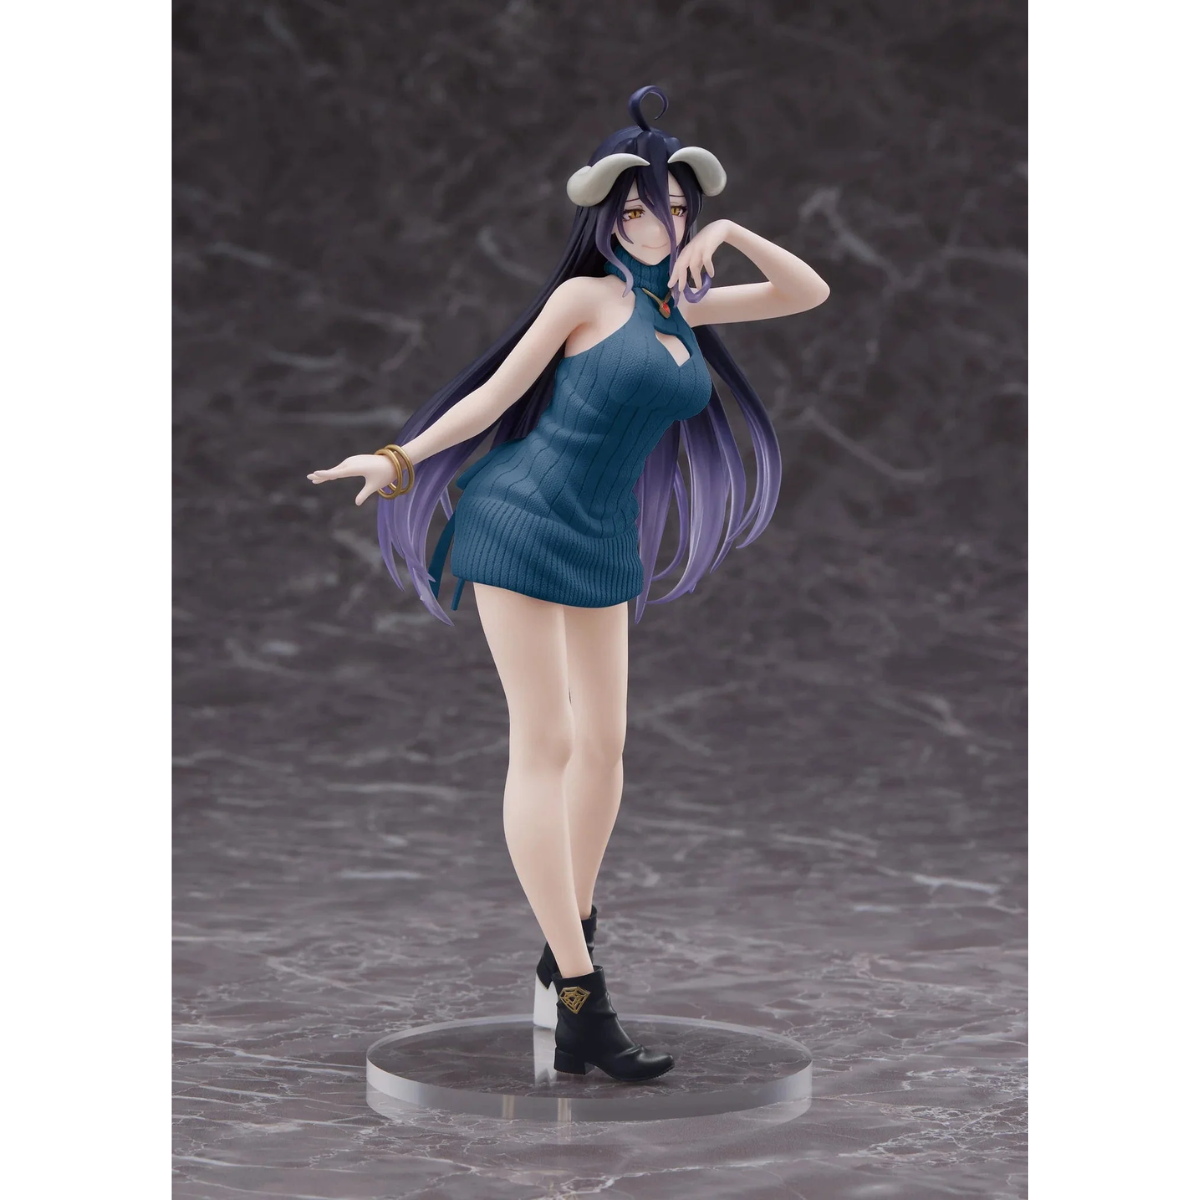 Overlord IV AMP Coreful Figure "Albedo" (Knit Dress Ver.) Renewal Edition-Taito-Ace Cards & Collectibles